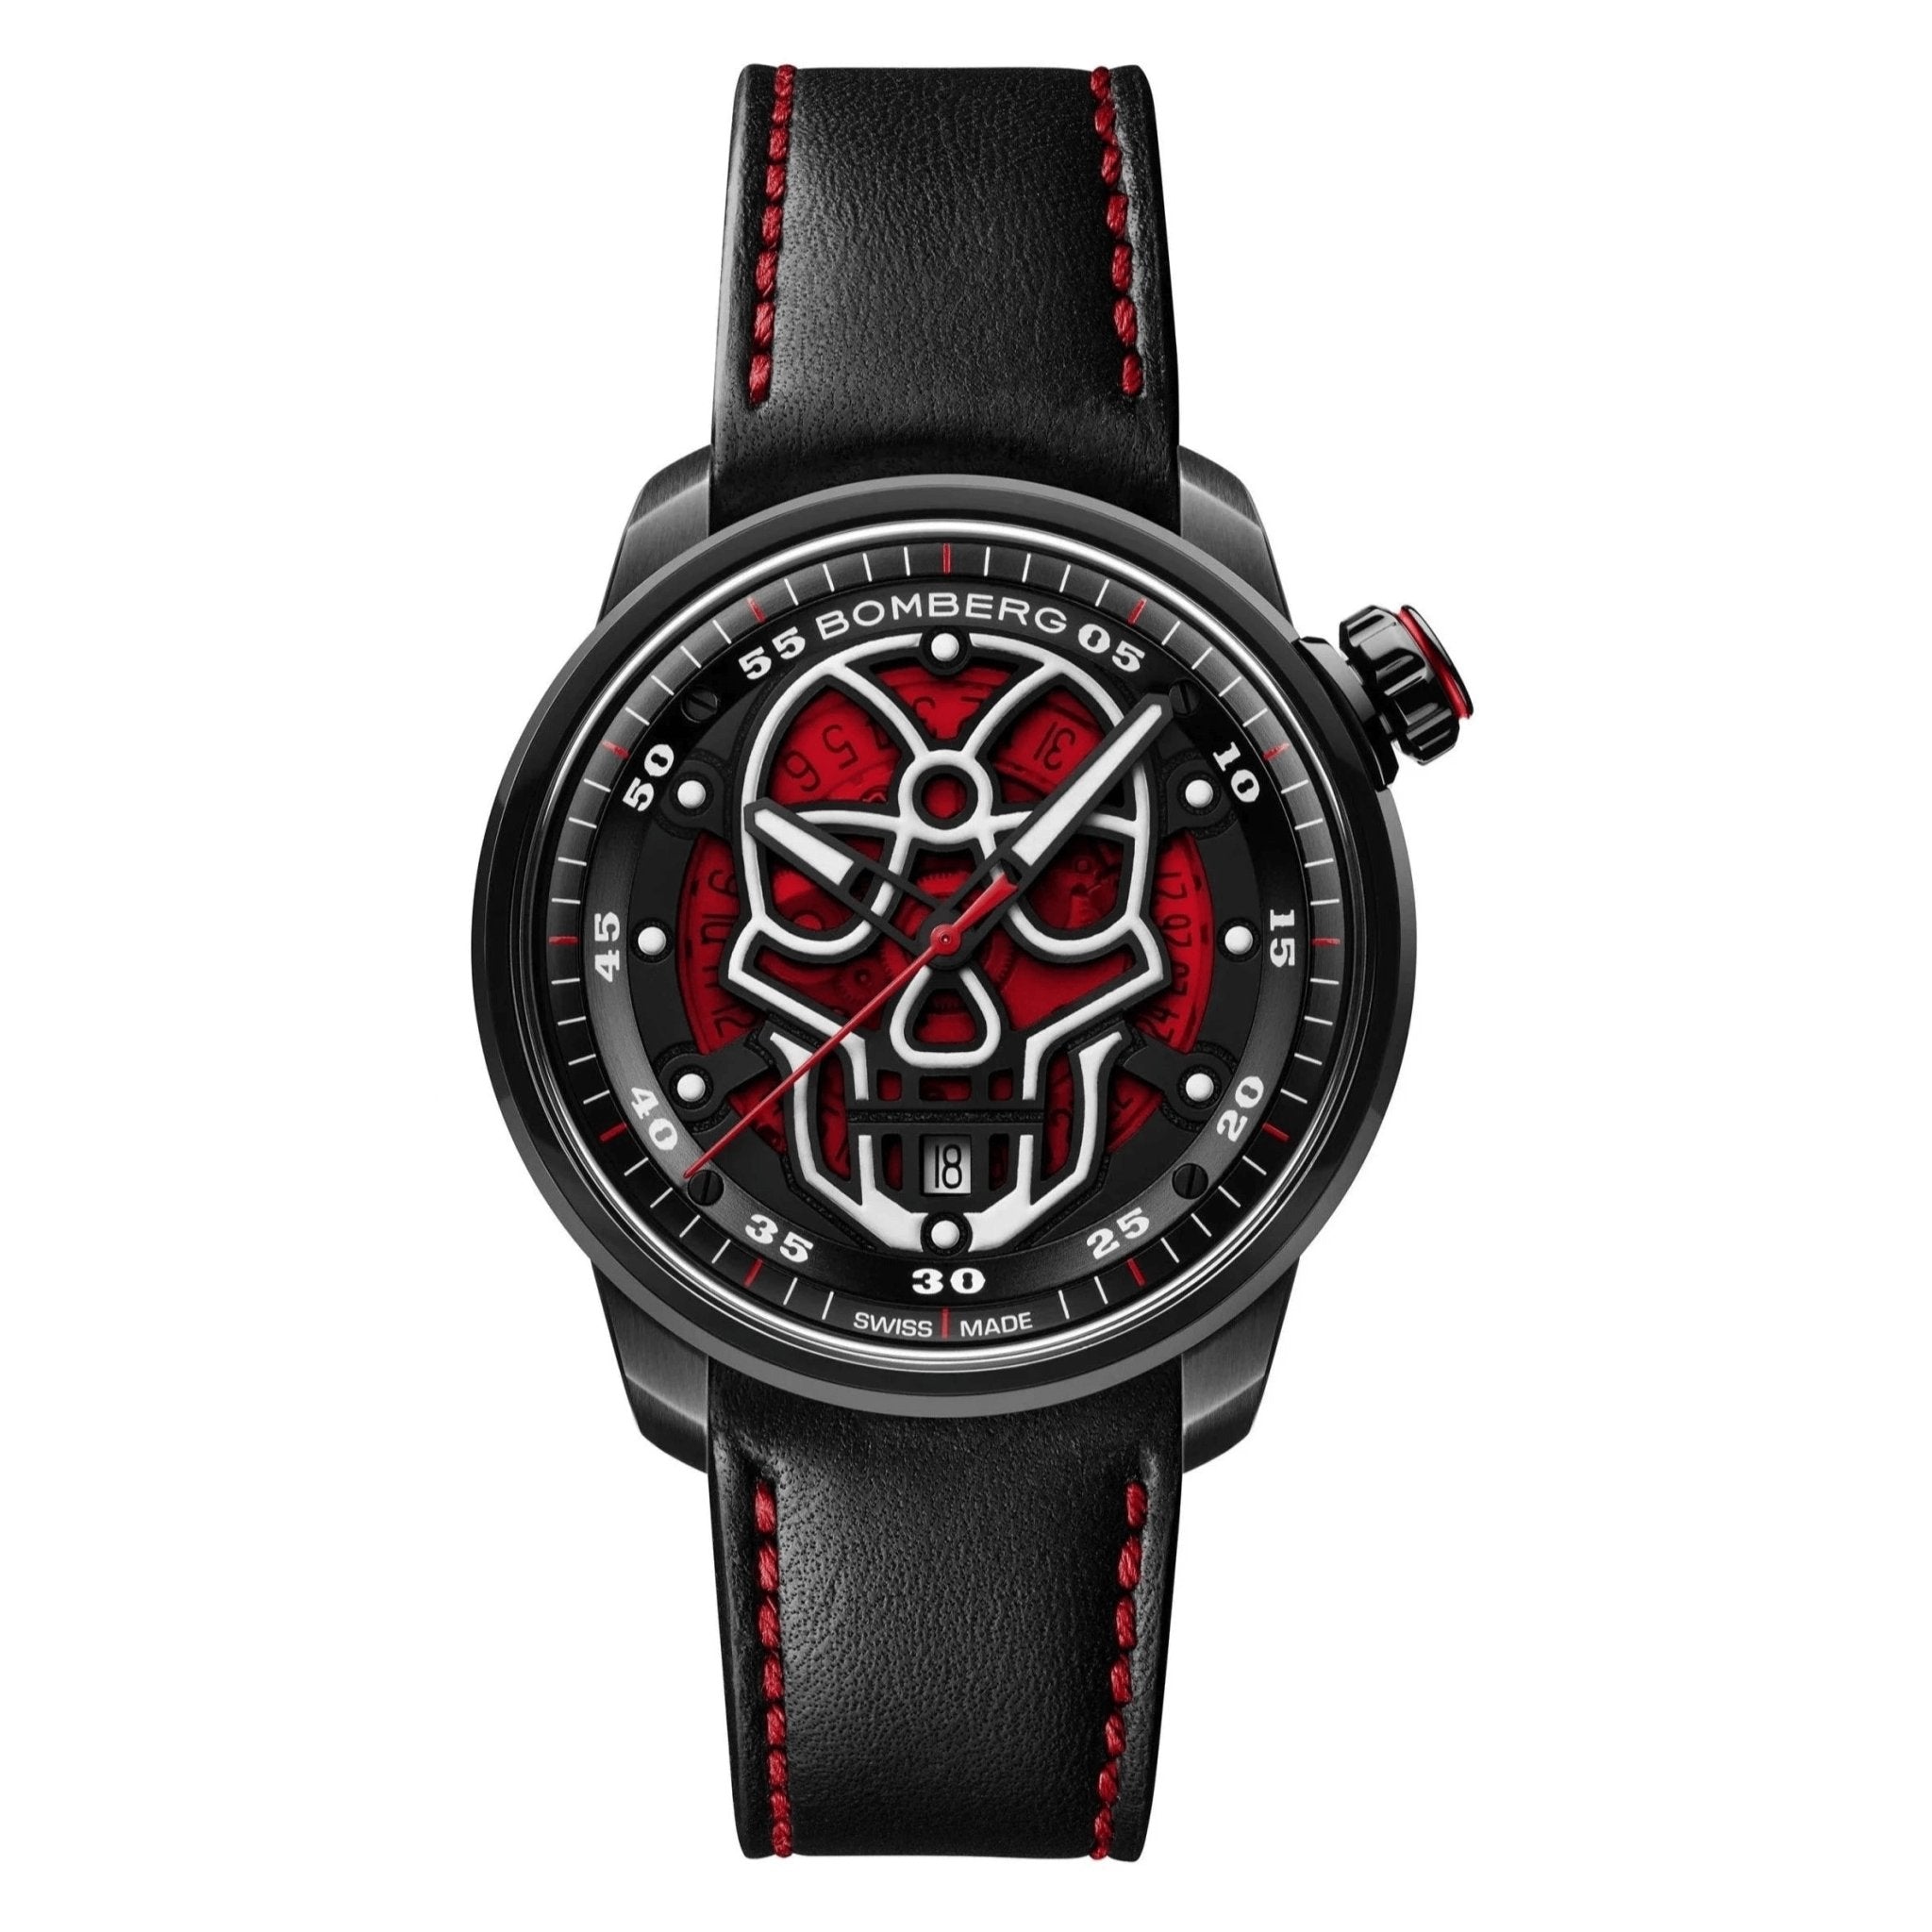 Bomberg Men's Watch BB-01 Black PVD Red Skull CT43APBA.23-1.11 - Watches & Crystals